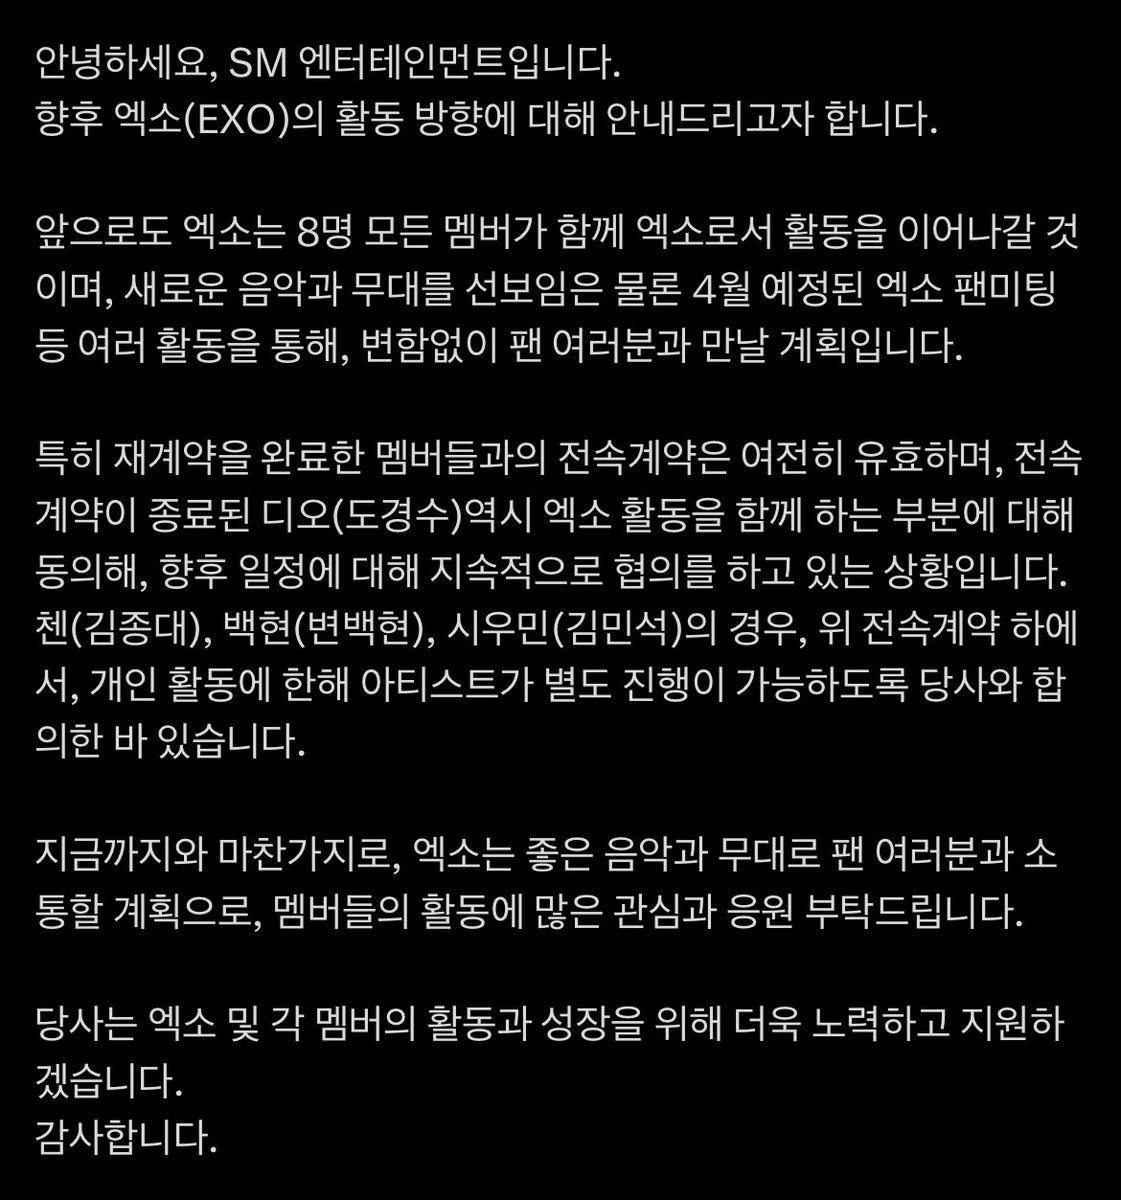 SM Entertainment announces all 8 members of EXO will continue promoting as a group under the company, they also plan to release new music soon.